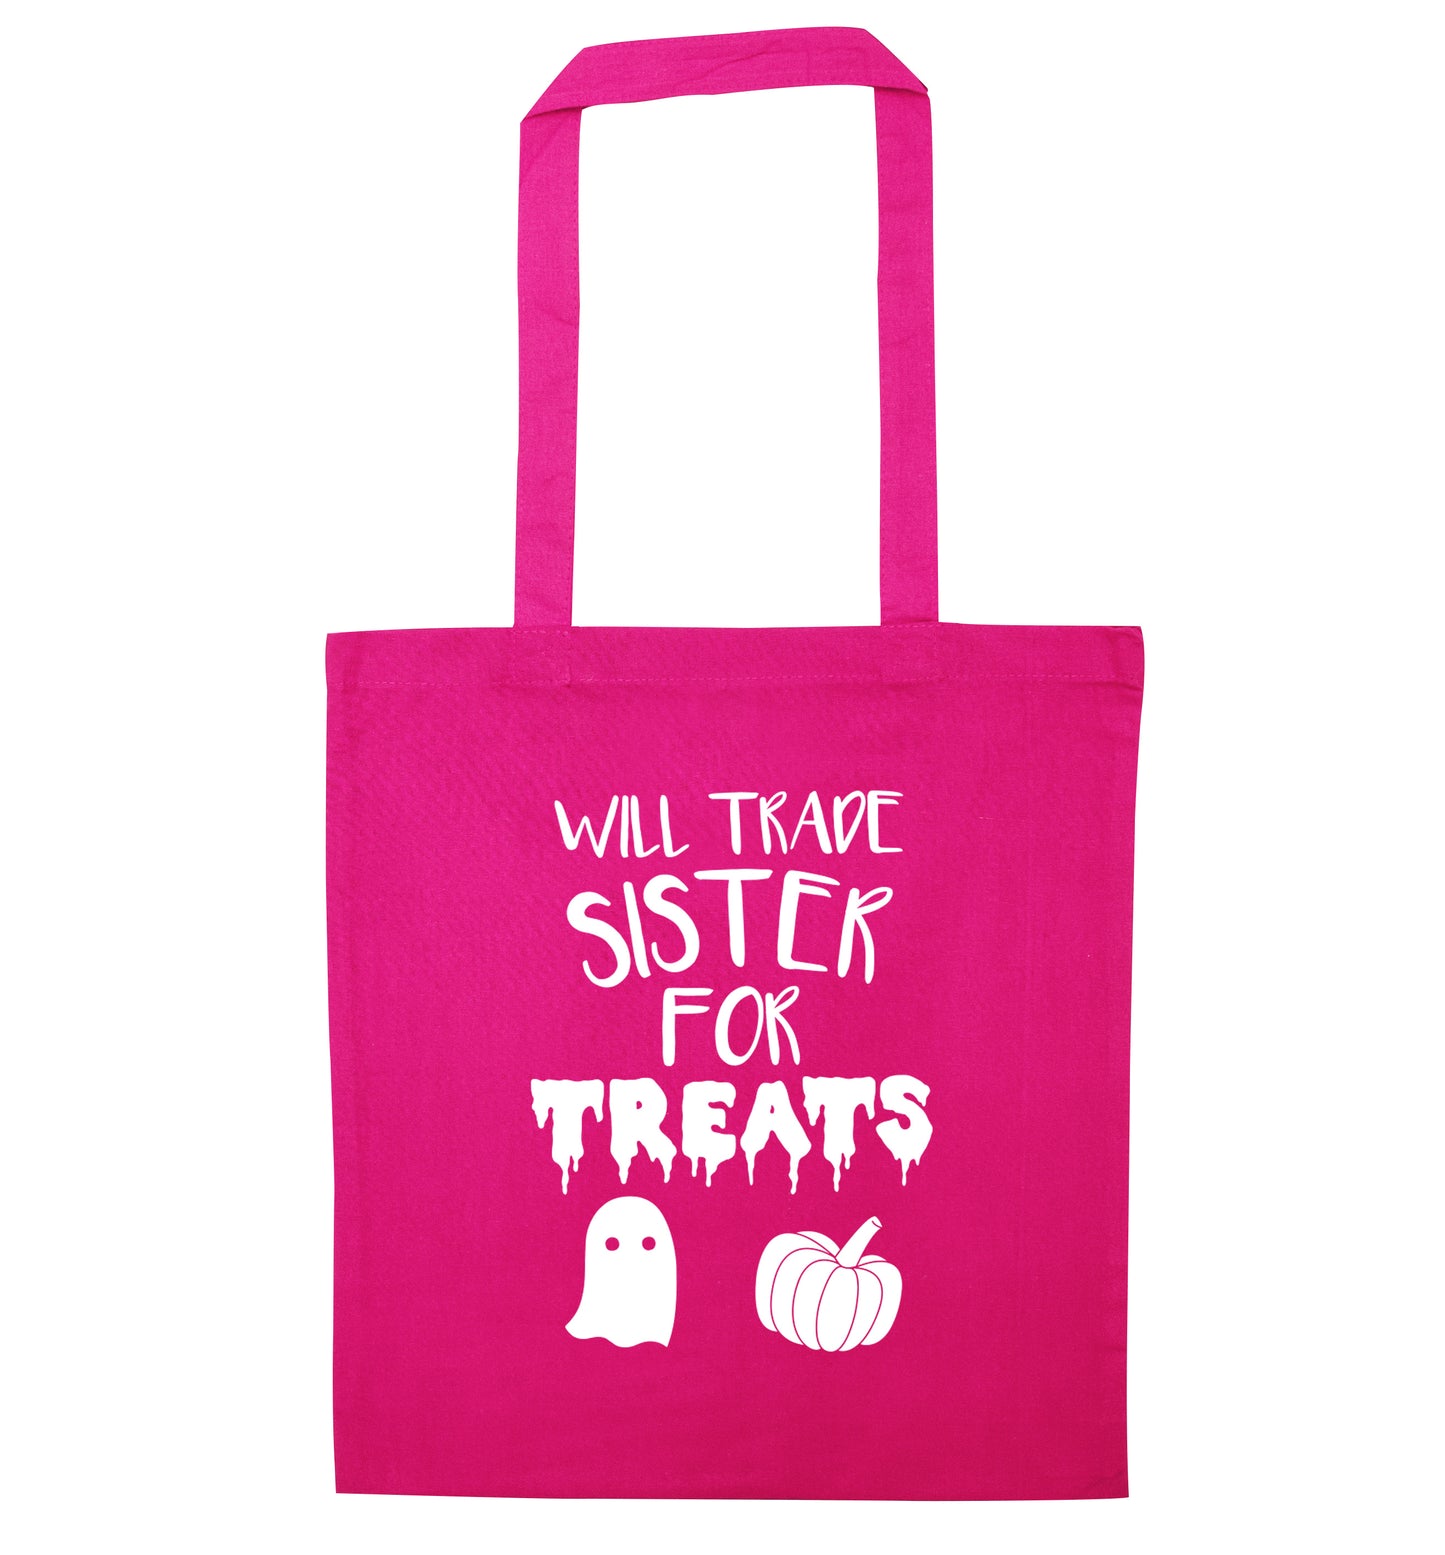 Will trade sister for sweets pink tote bag